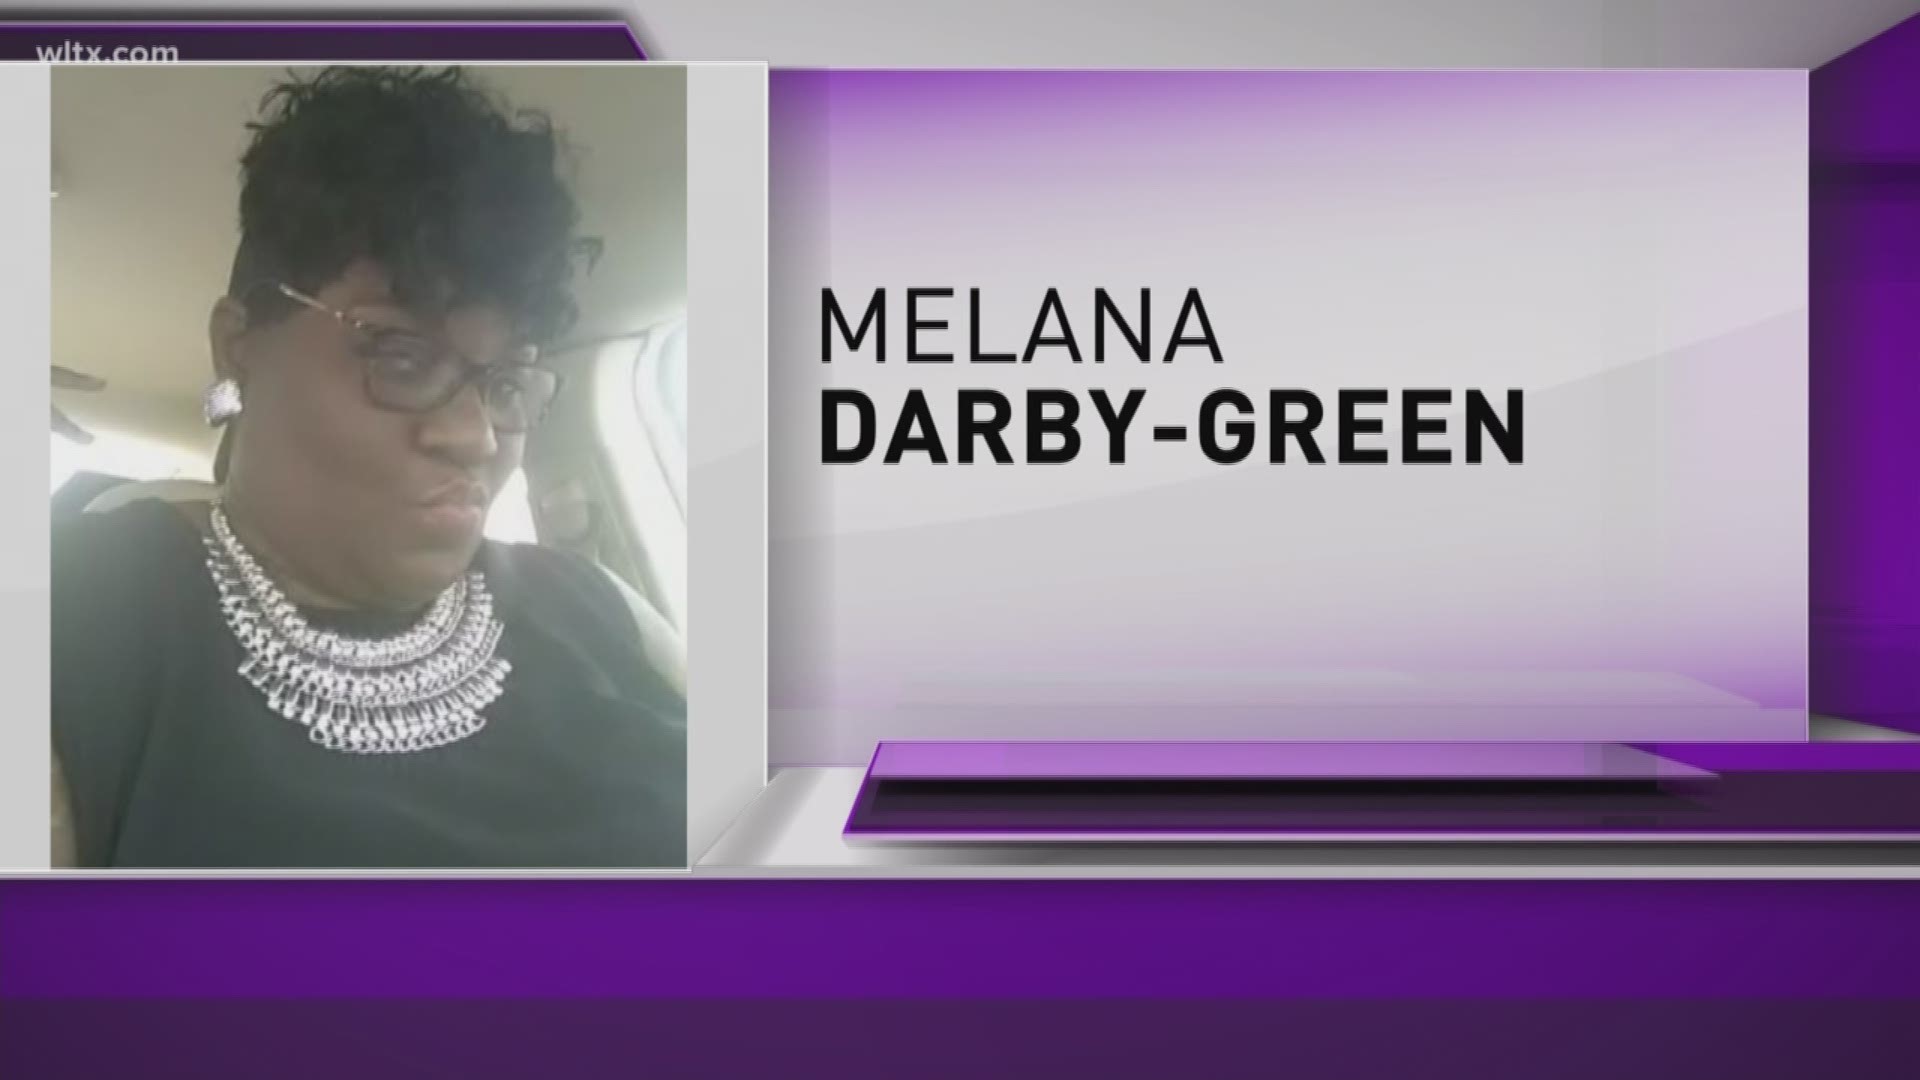 Congratulations to our Mom of the Day, Melana Darby-Green. Melana was nominated by her daughter Daisia.